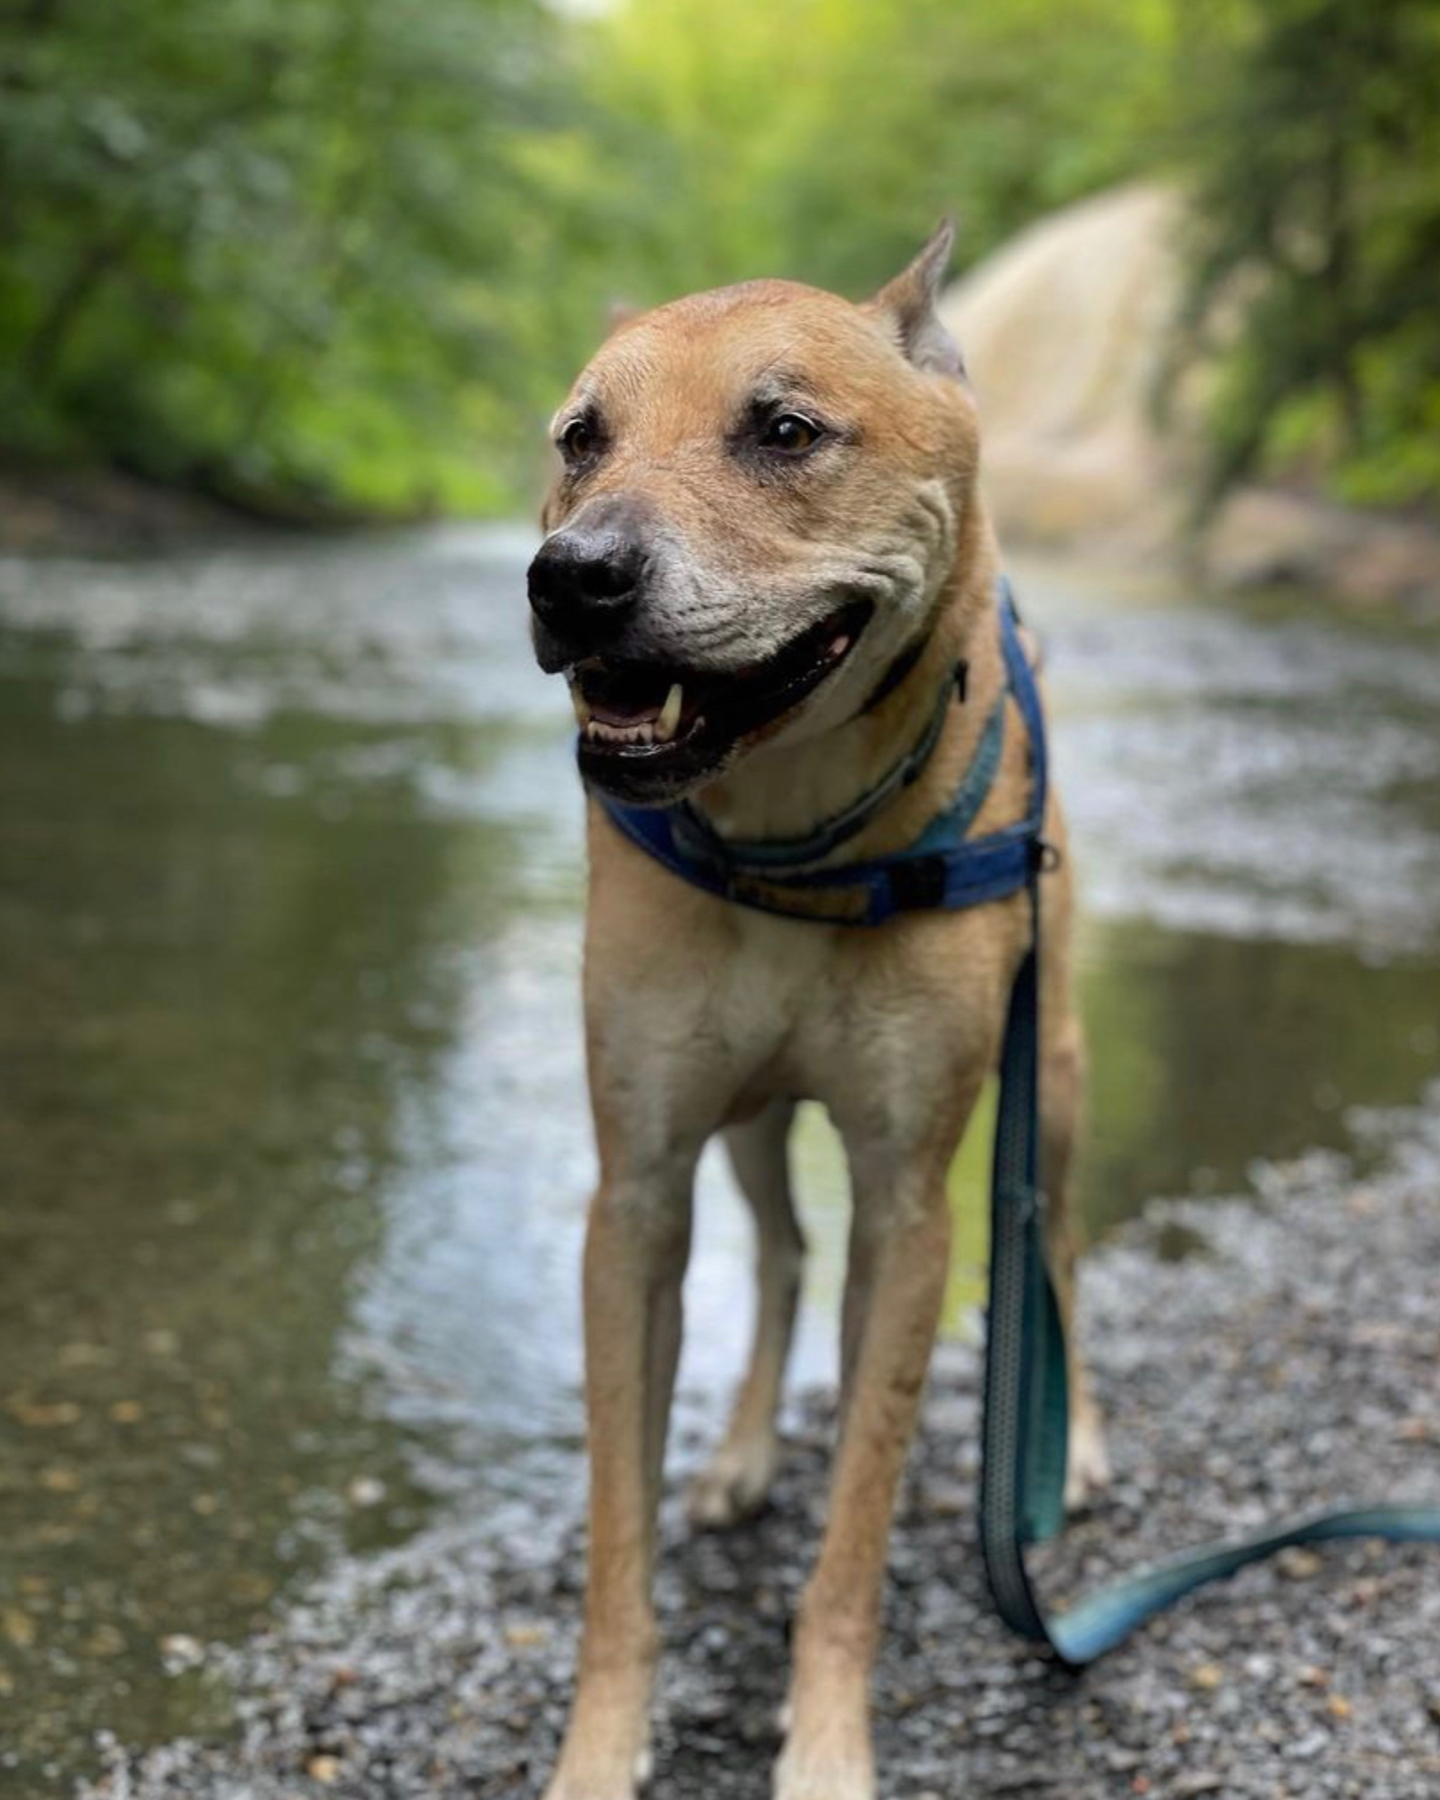 A Carolina dog named Kao enjoying his time in nature with his owners